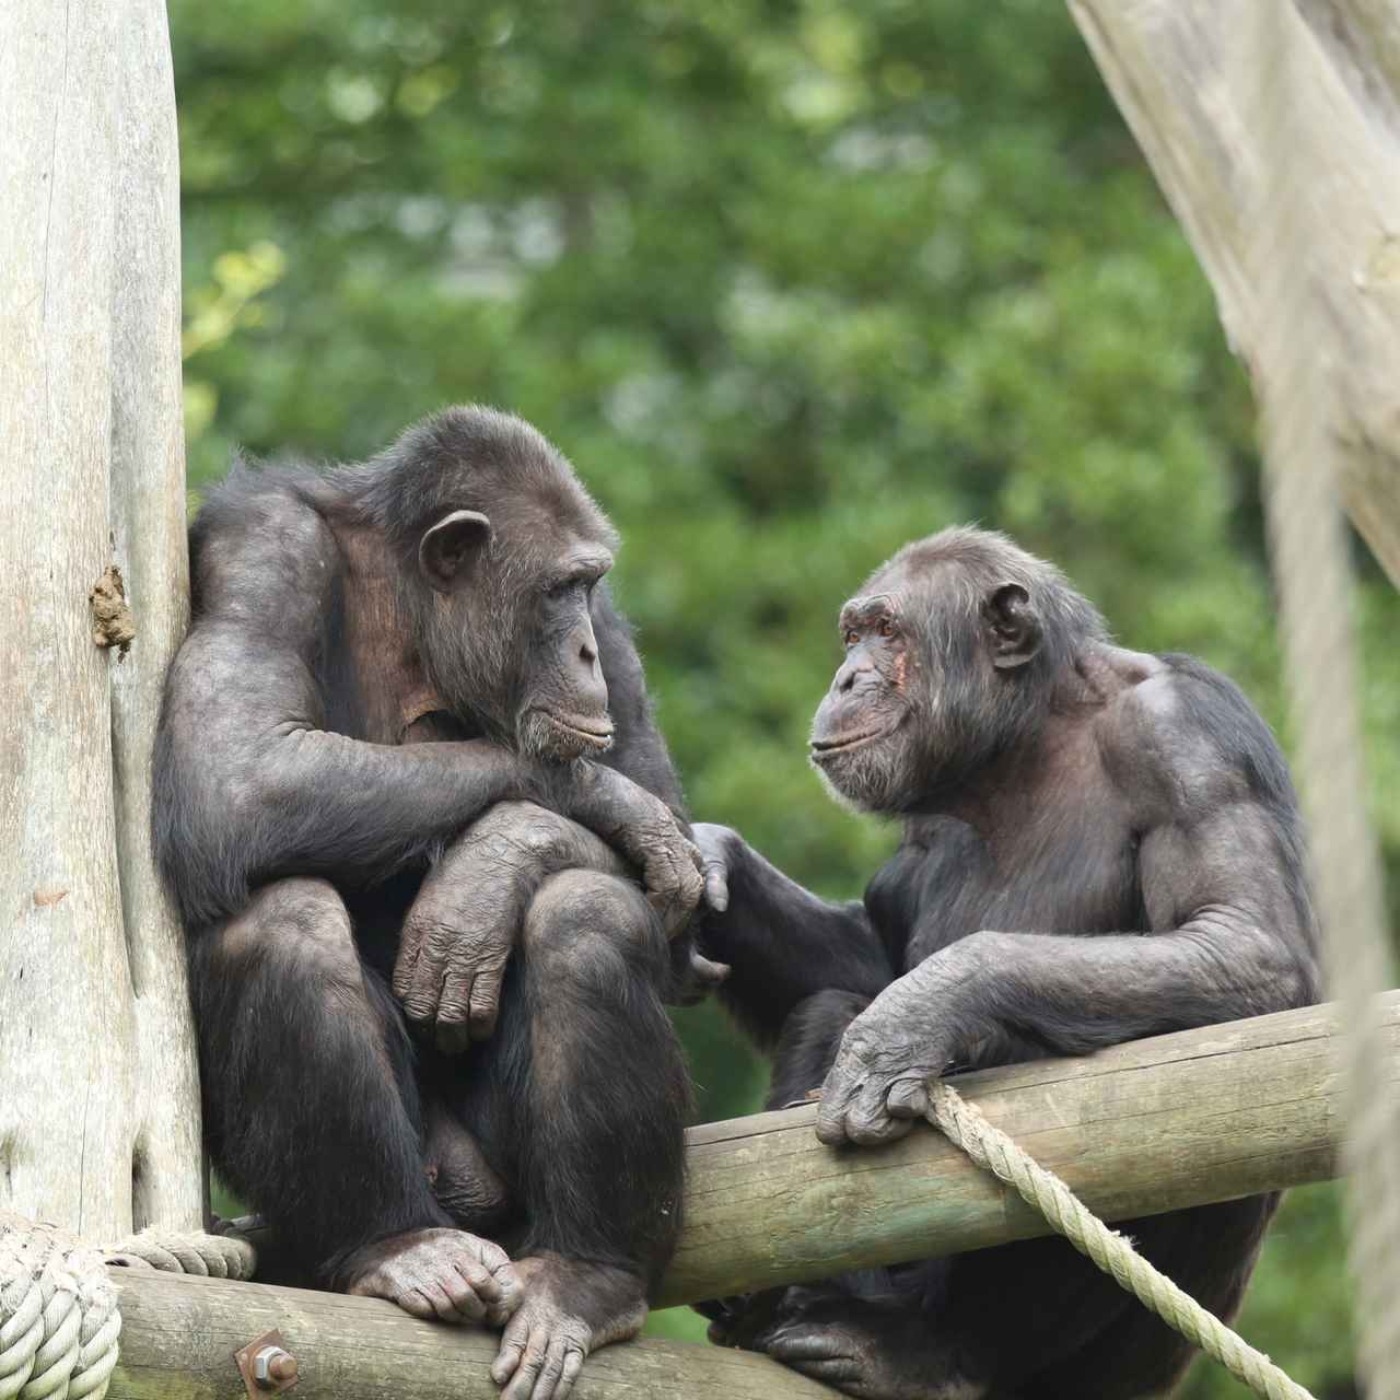 117: Bonobos and chimps show 'a rich recognition' for long-lost friends and family